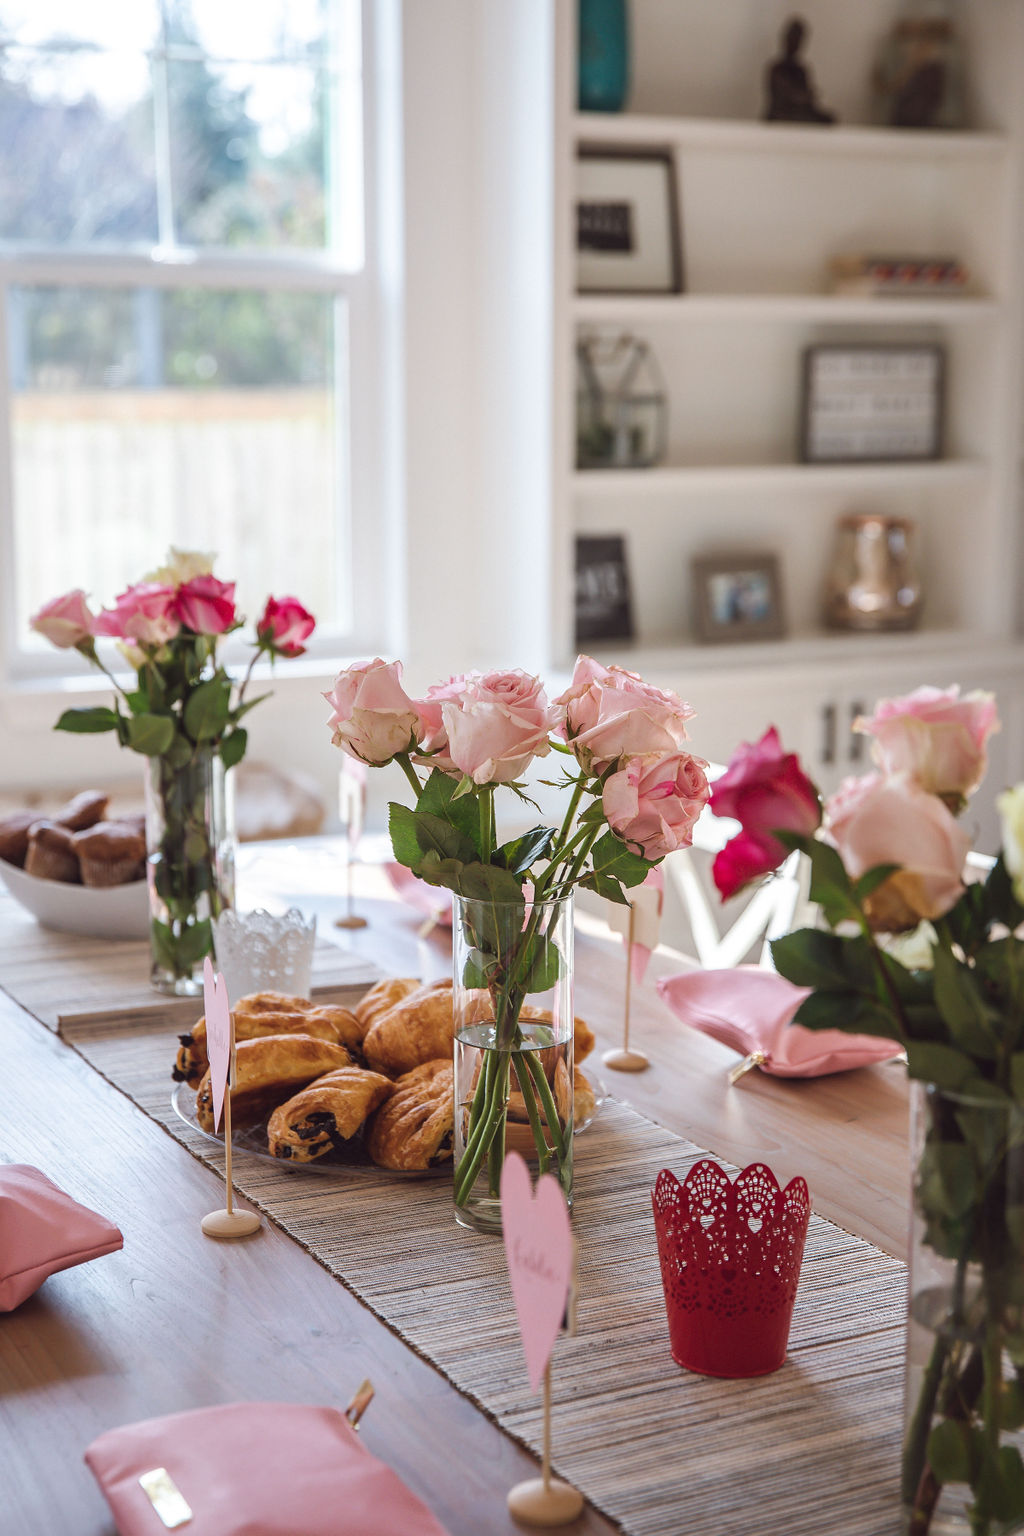 The Grey Edit - Galentine's Brunch - Blogging Community - Styled Out West Home